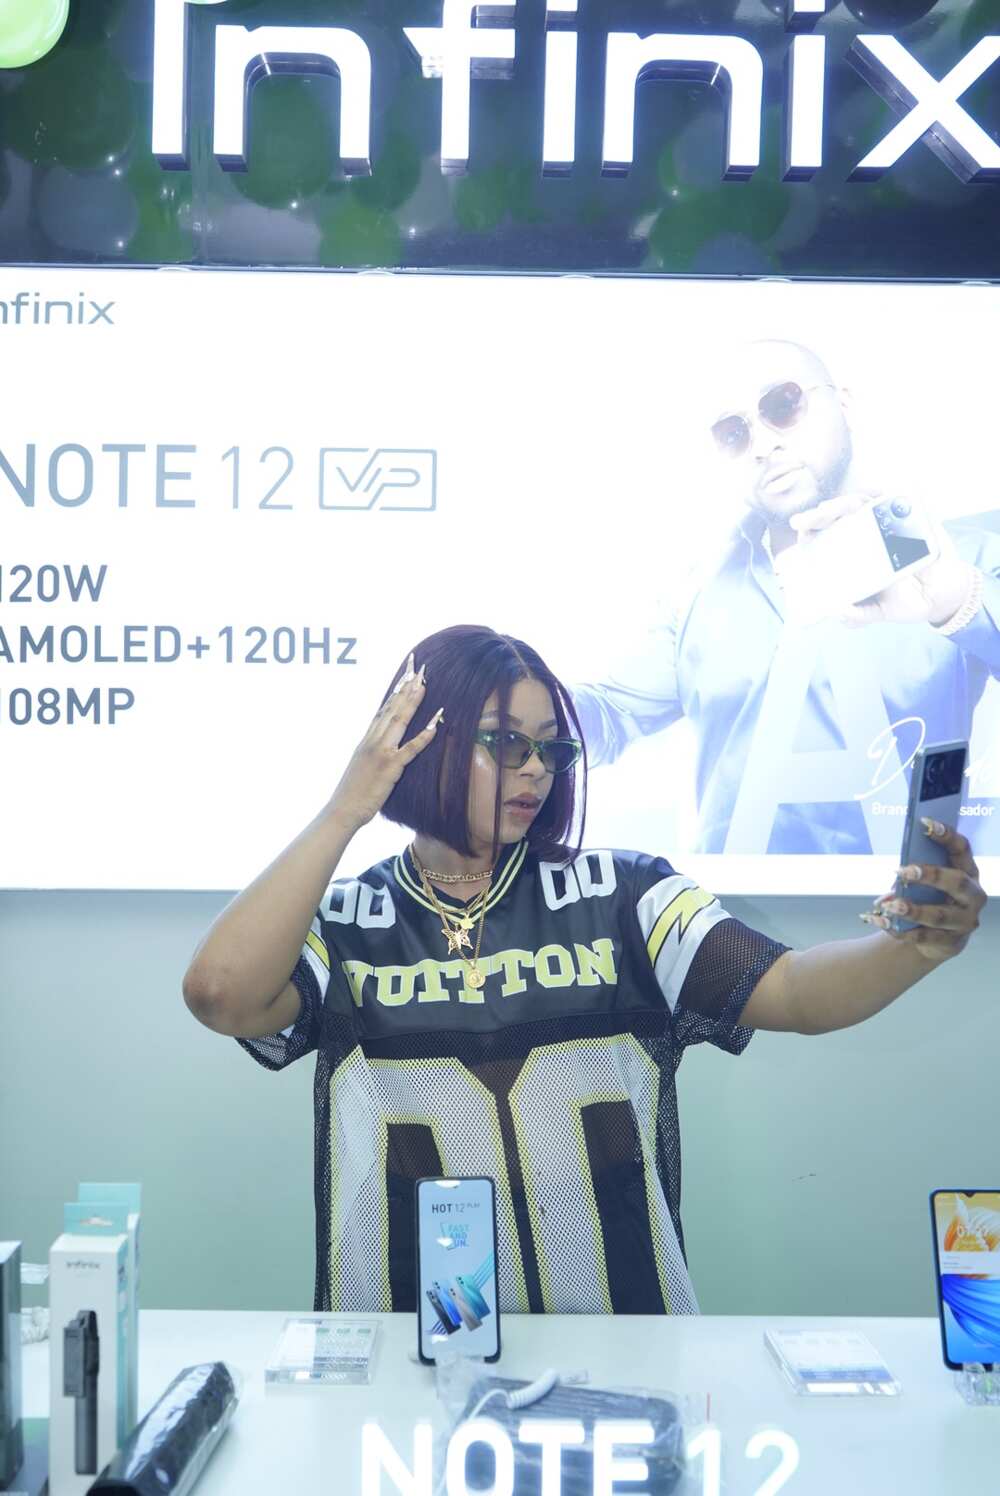 Join in the Fun with the Infinix Note12 Pop-Up Shop Experience Tour in your City